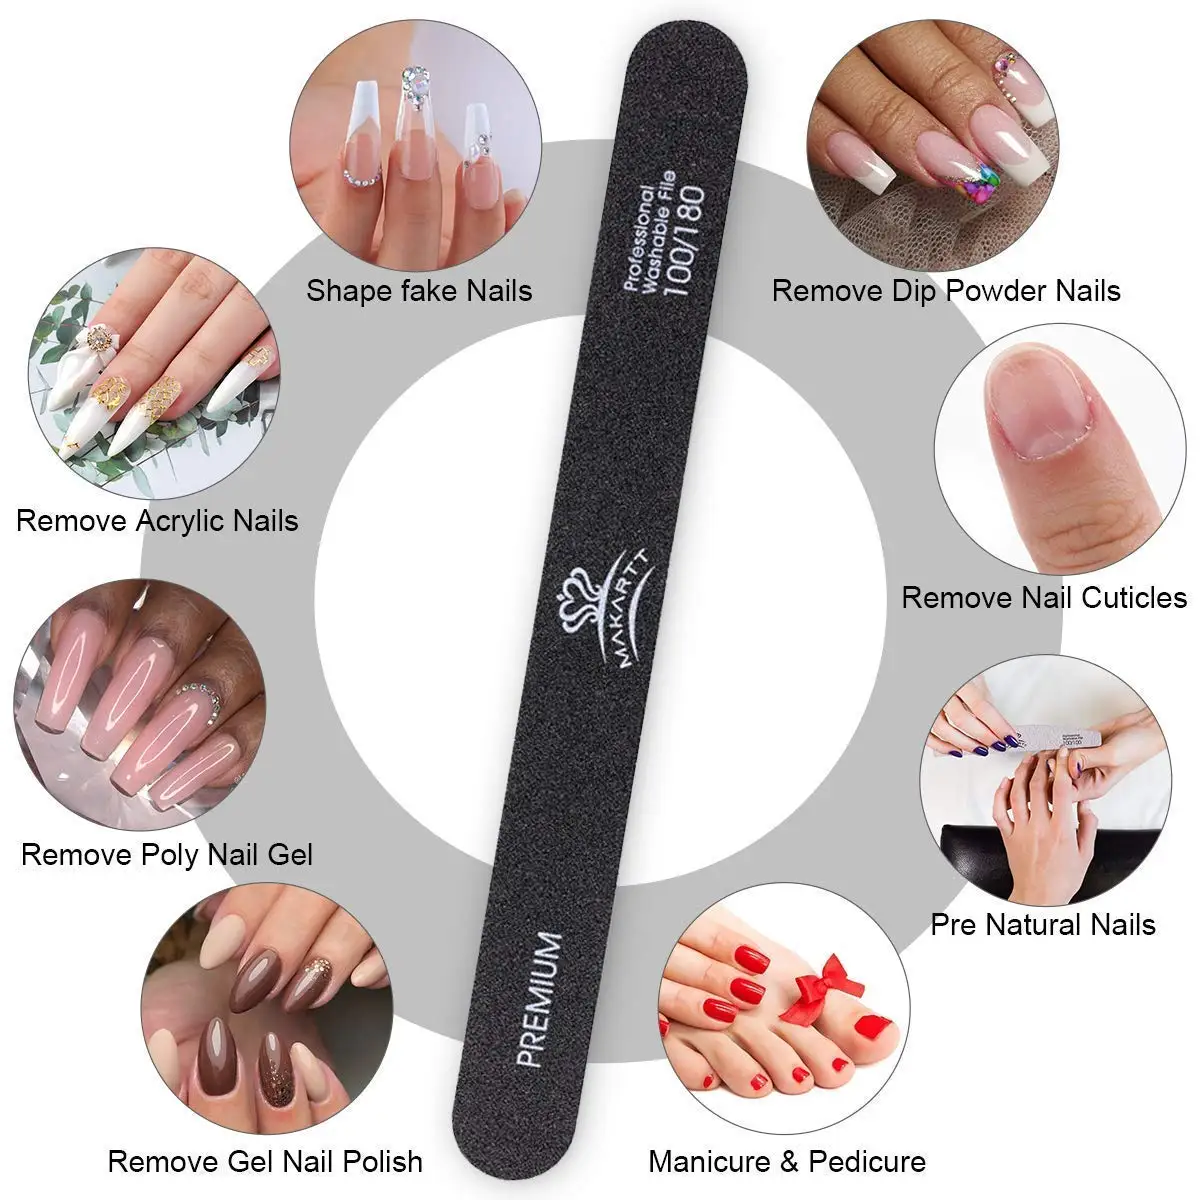 Nail Files 100 180 ,120 240 Grit For Poly Nail Extension Gel Acrylic Nails  Files Double Sided Black Washable Nail File Set - Nail Files - AliExpress